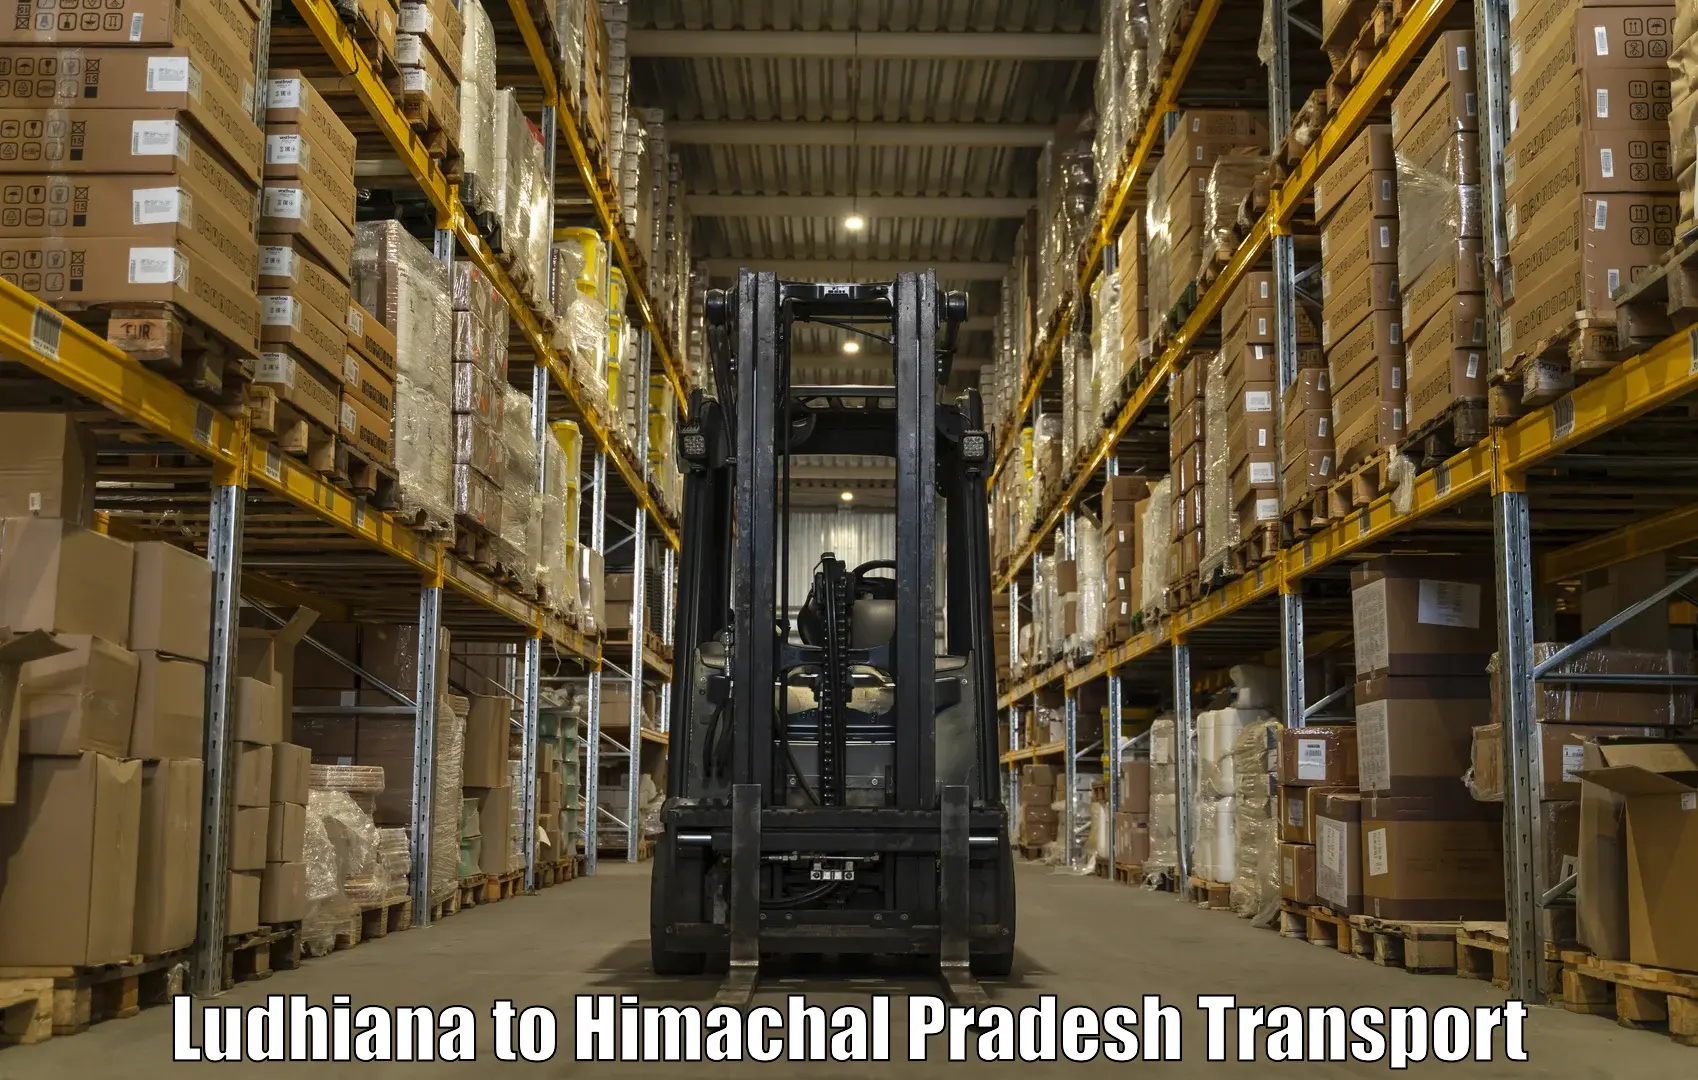 Express transport services Ludhiana to Dharamshala